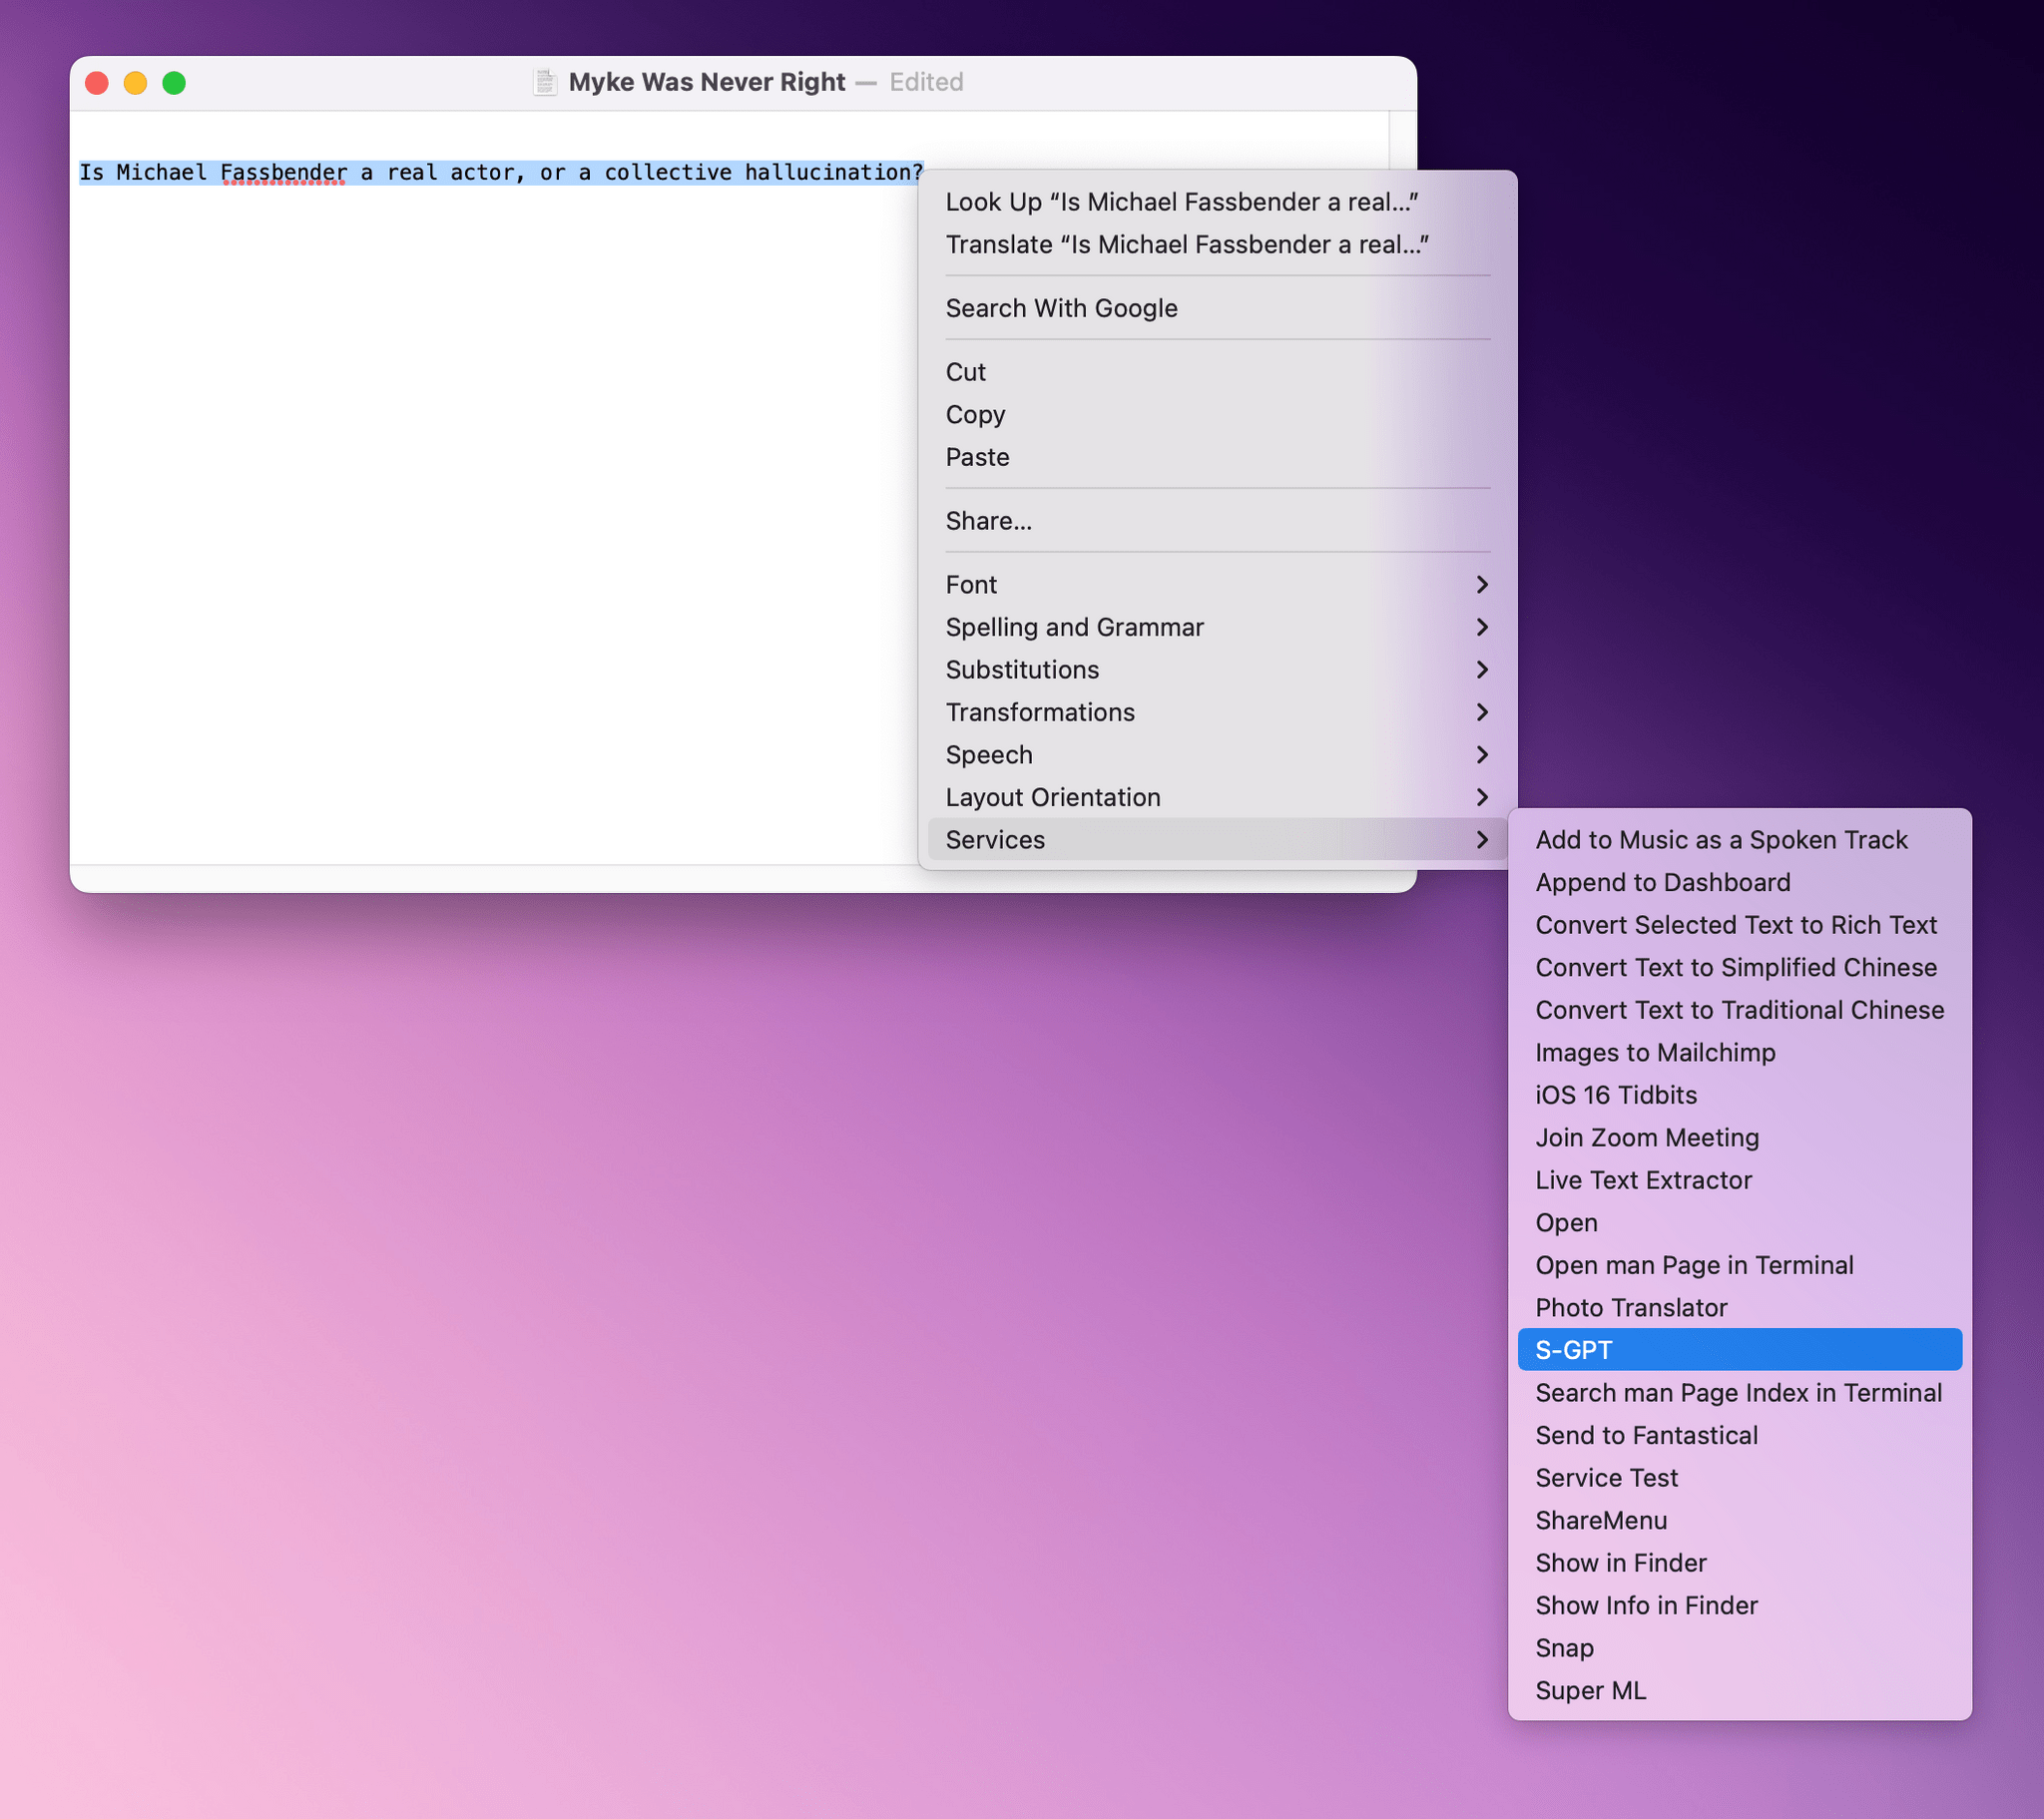 Triggering S-GPT from the Services menu on macOS.